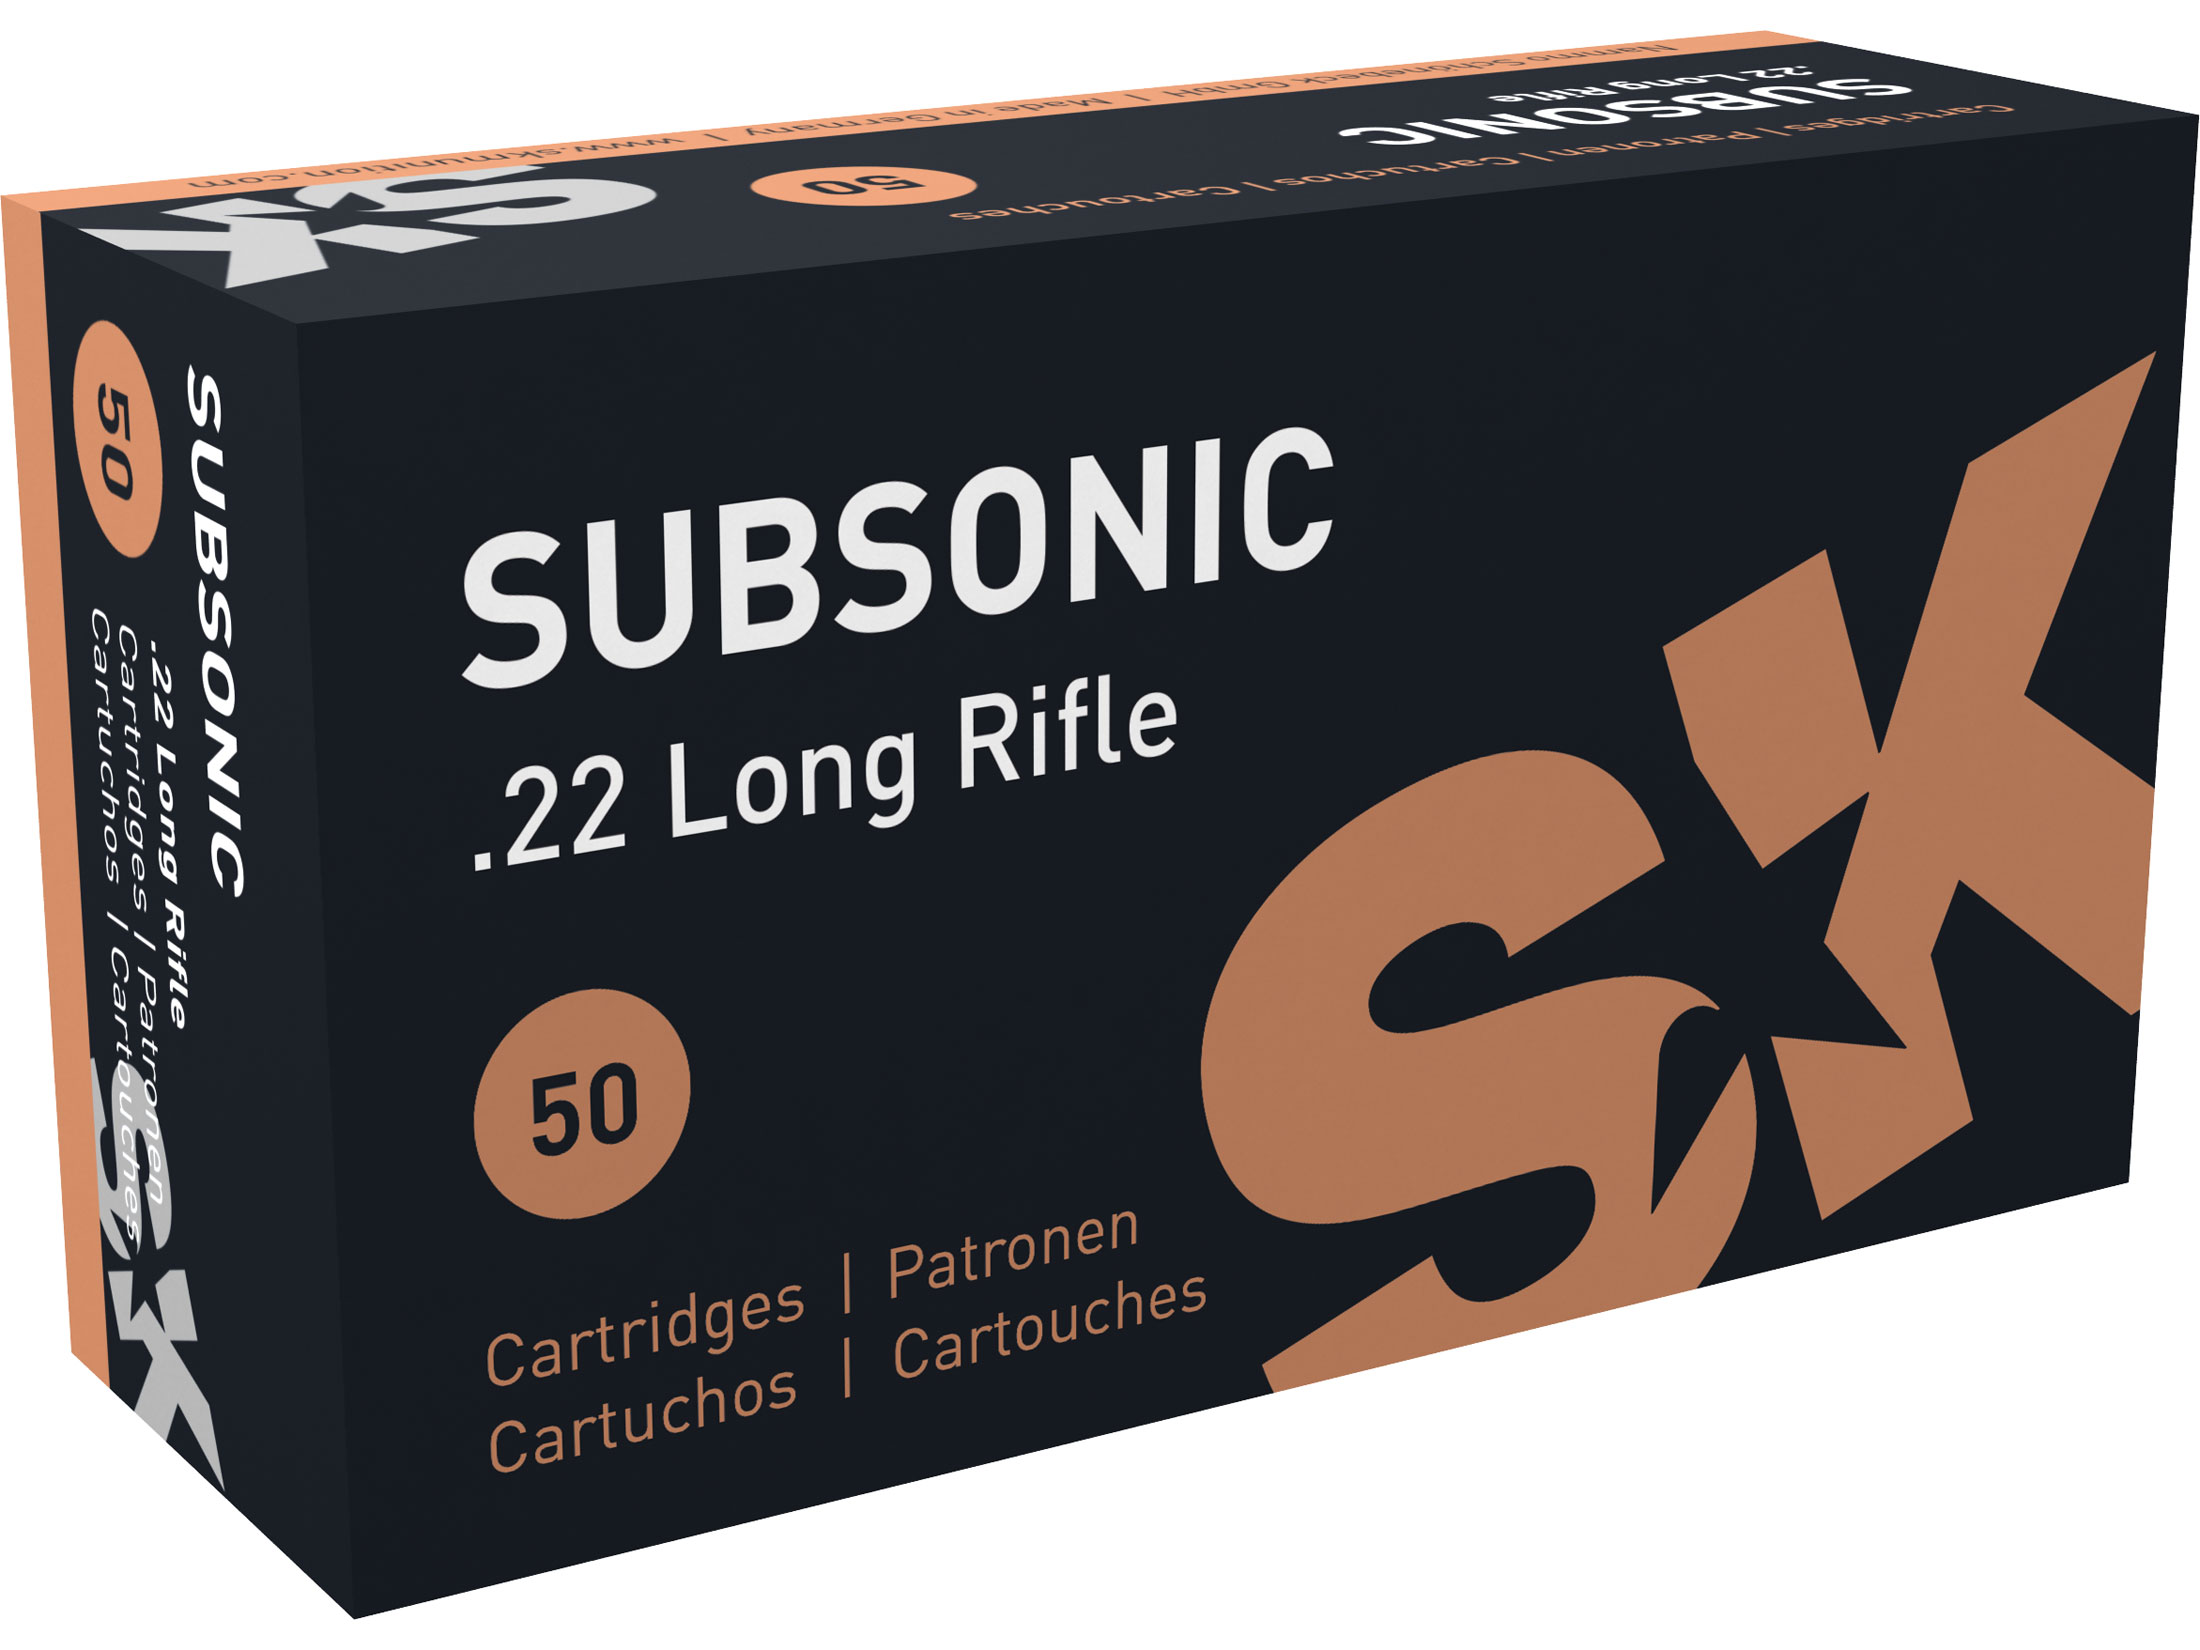 22lr subsonic rounds